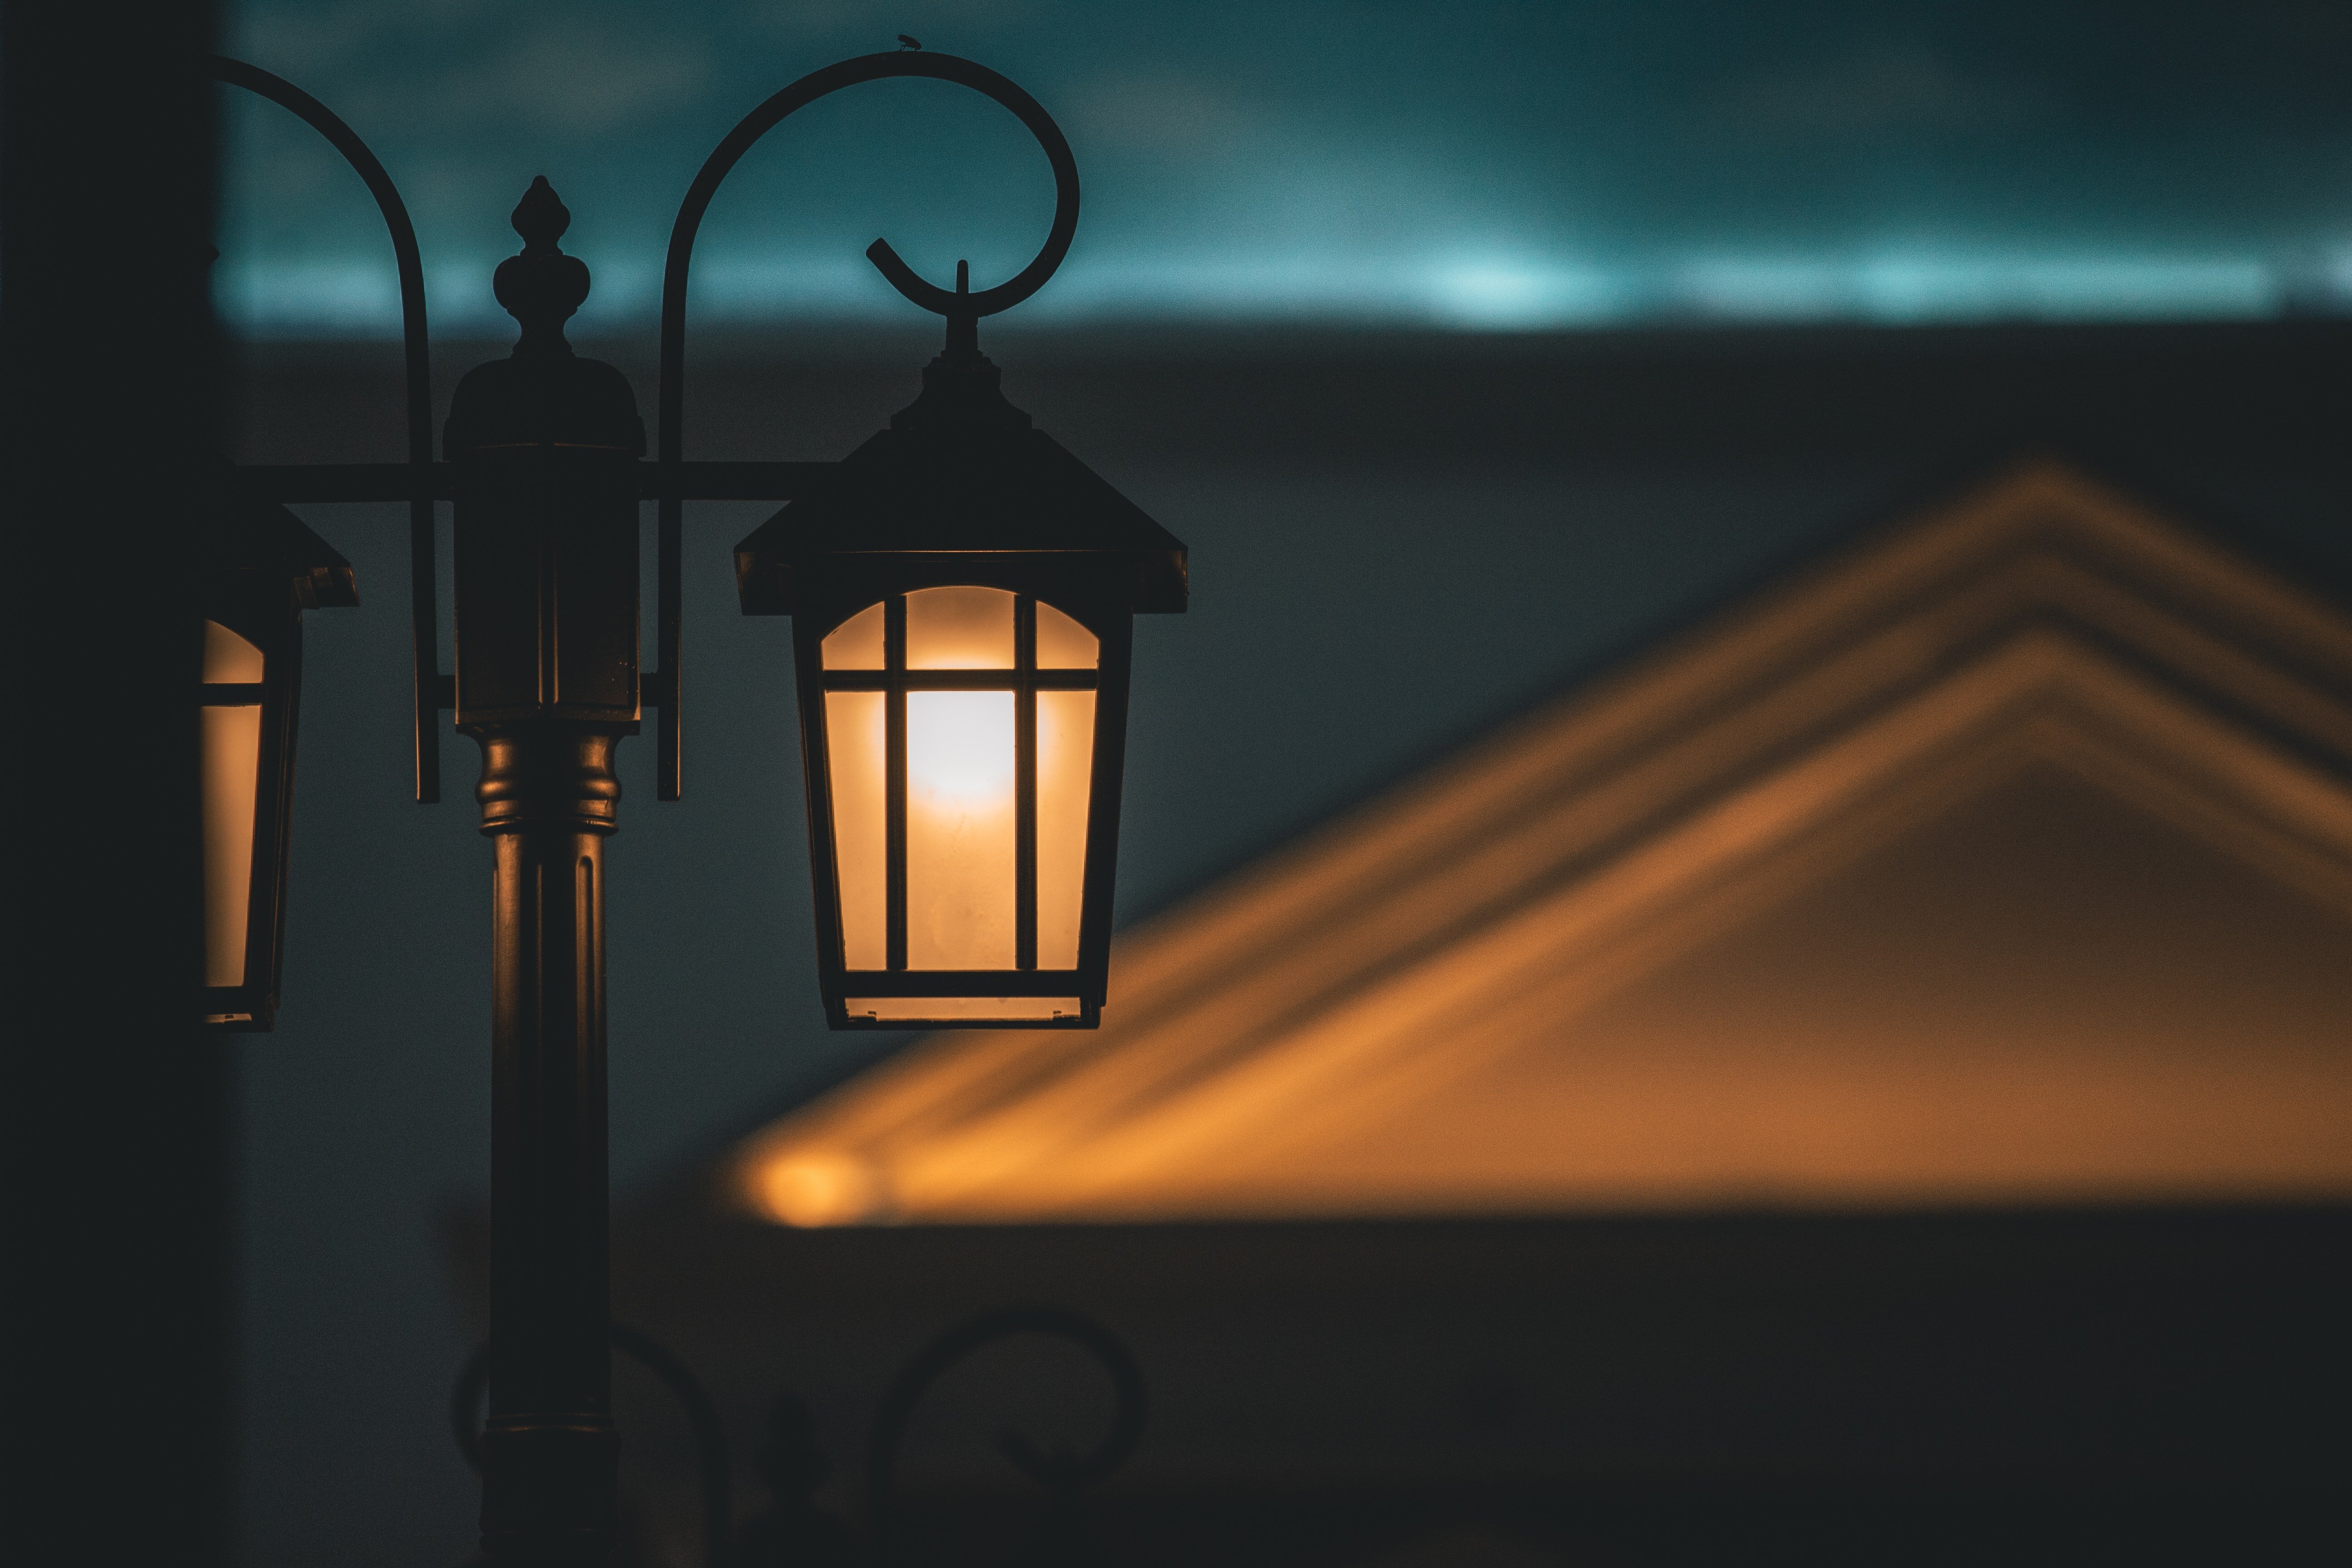 A street light shining brightly | Source: Pexels